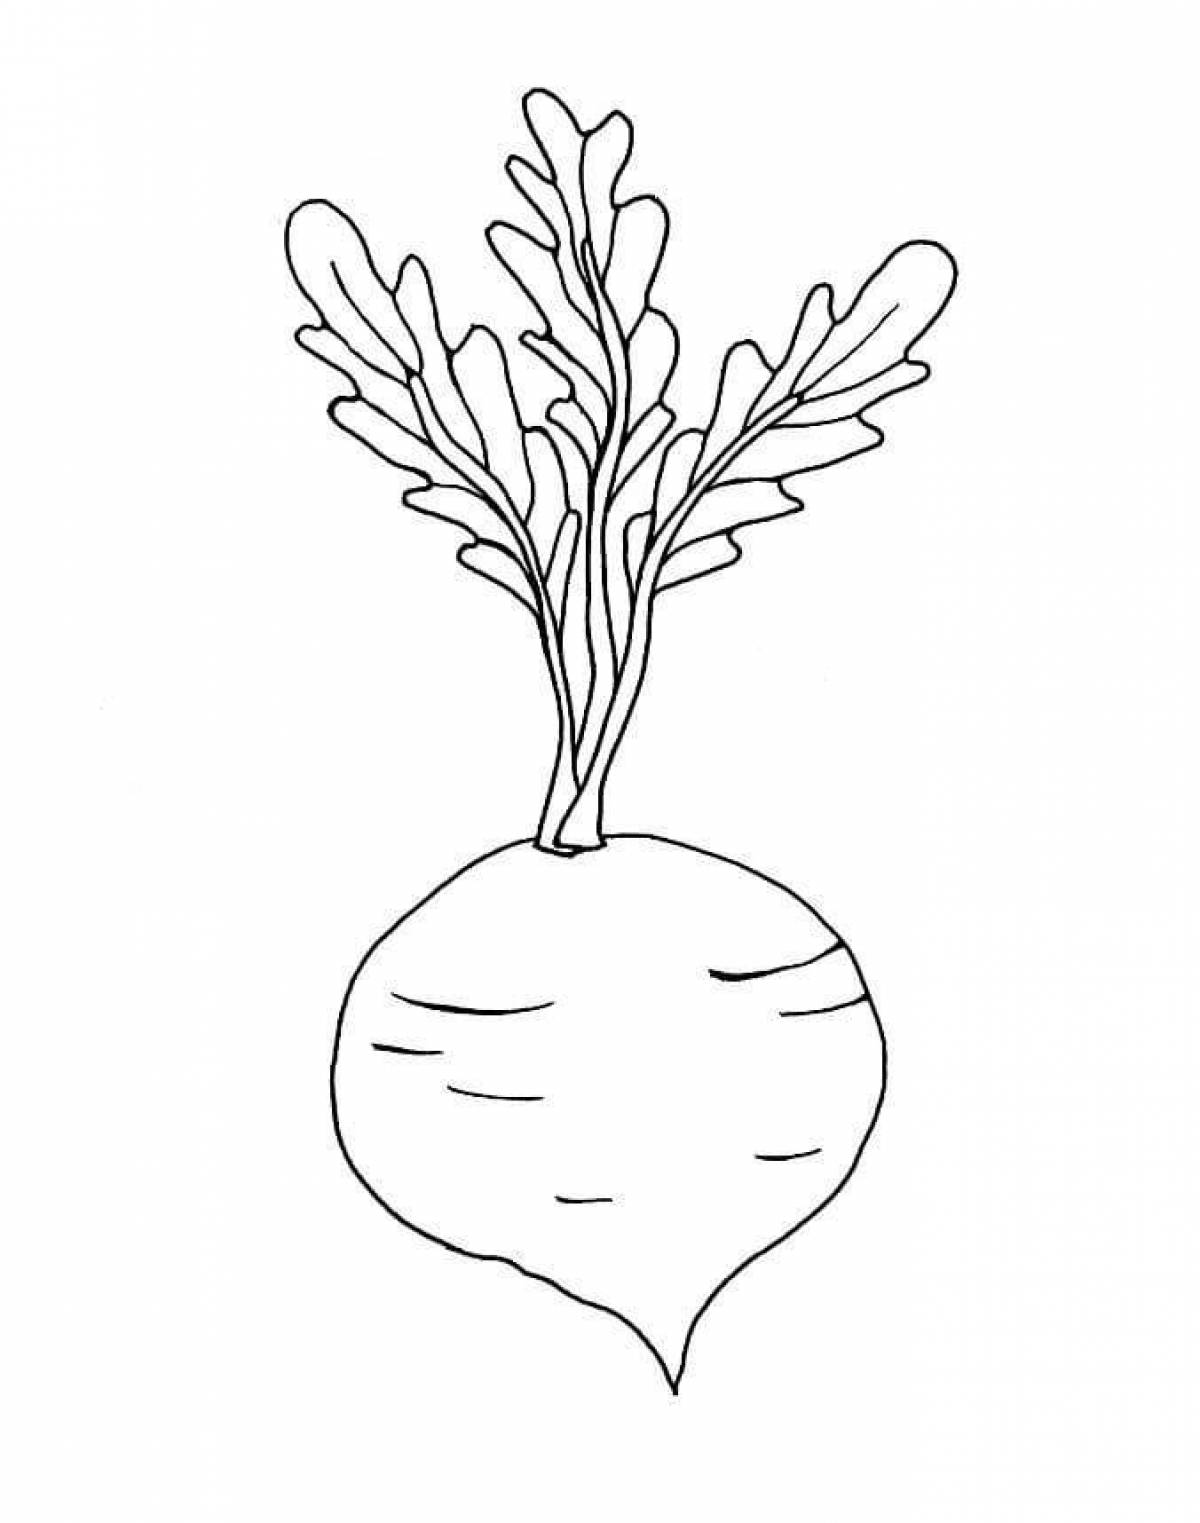 Unique beetroot coloring page for kids